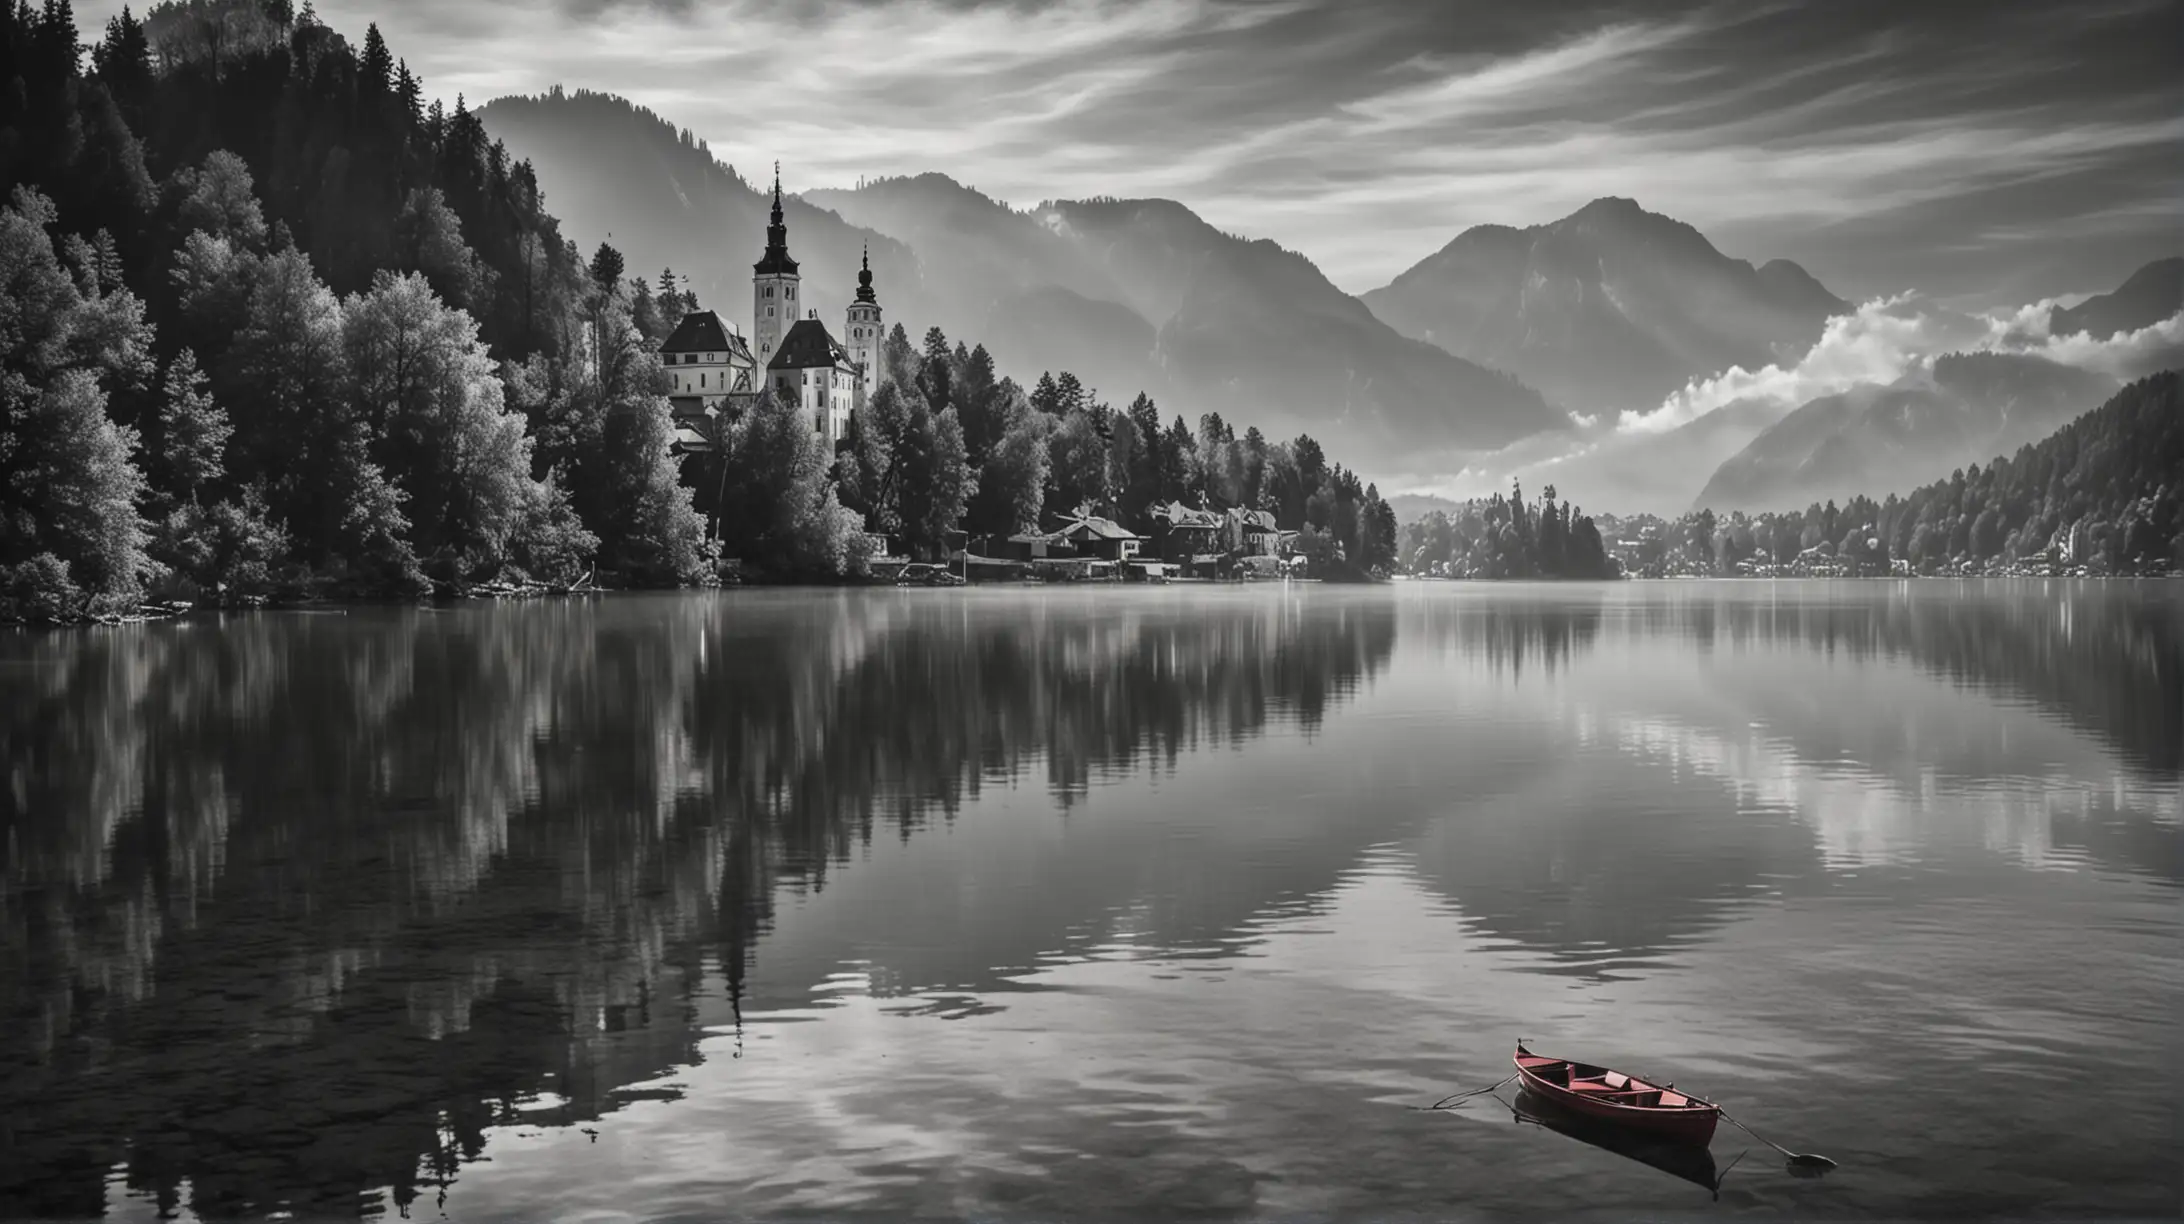 Create monochrome images of lake Bled that highlight a red boat